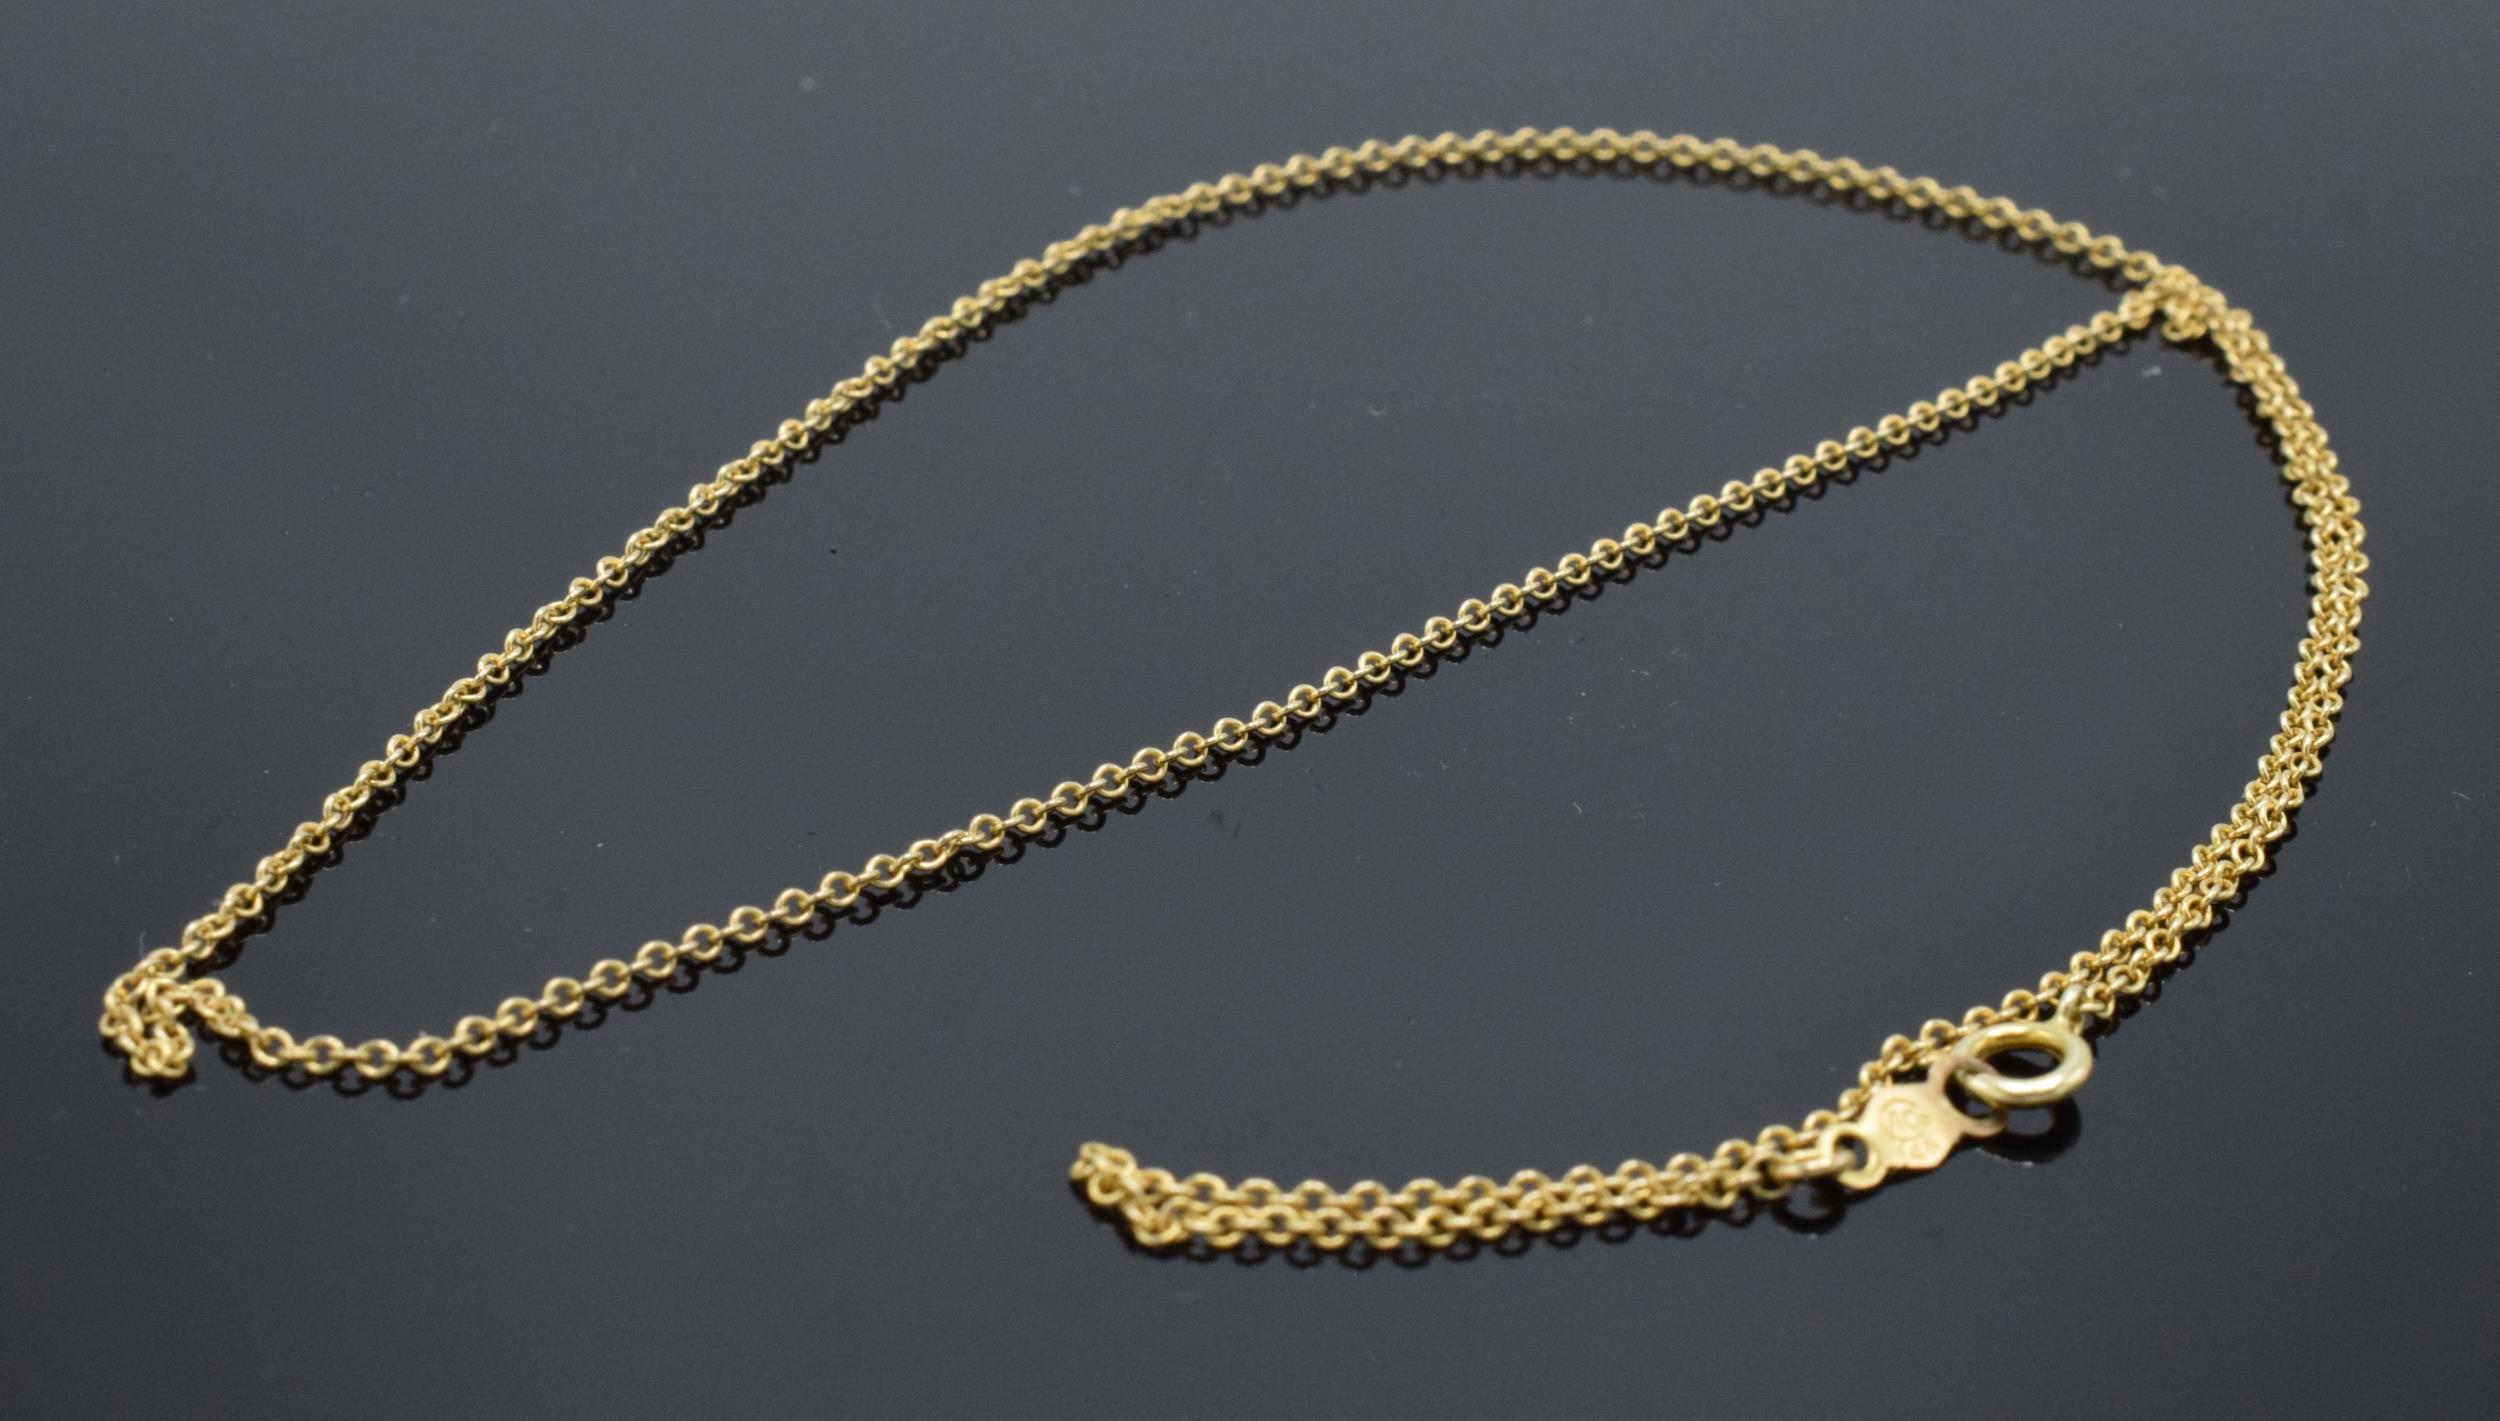 14ct gold fine link chain / necklace, 1.3 grams, 41cm long. - Image 2 of 4